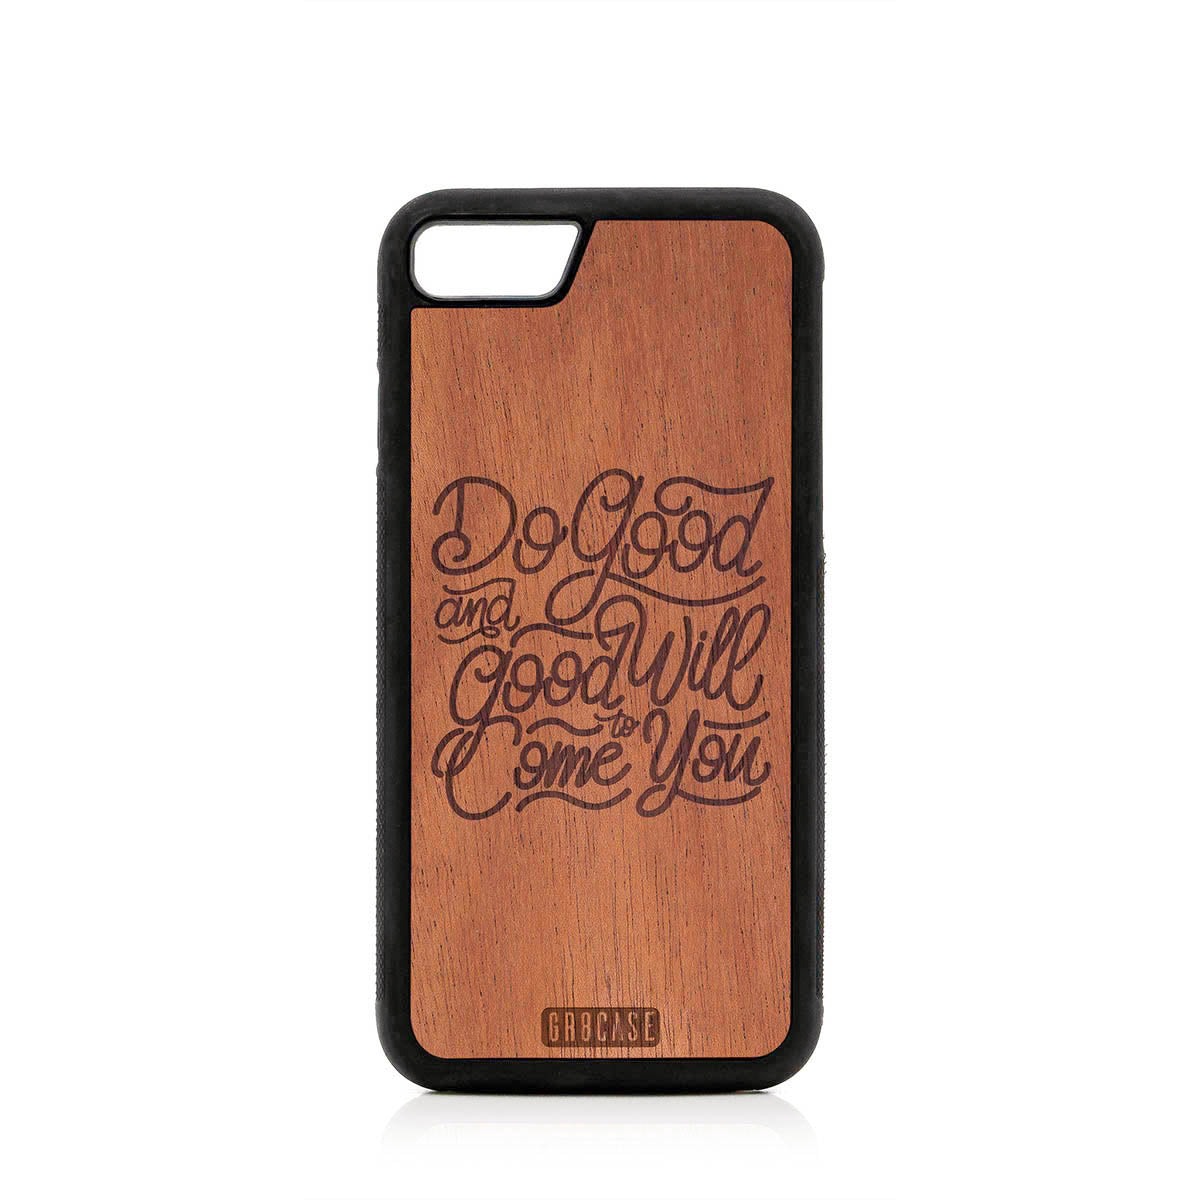 Do Good And Good Will Come To You Design Wood Case For iPhone SE 2020 by GR8CASE